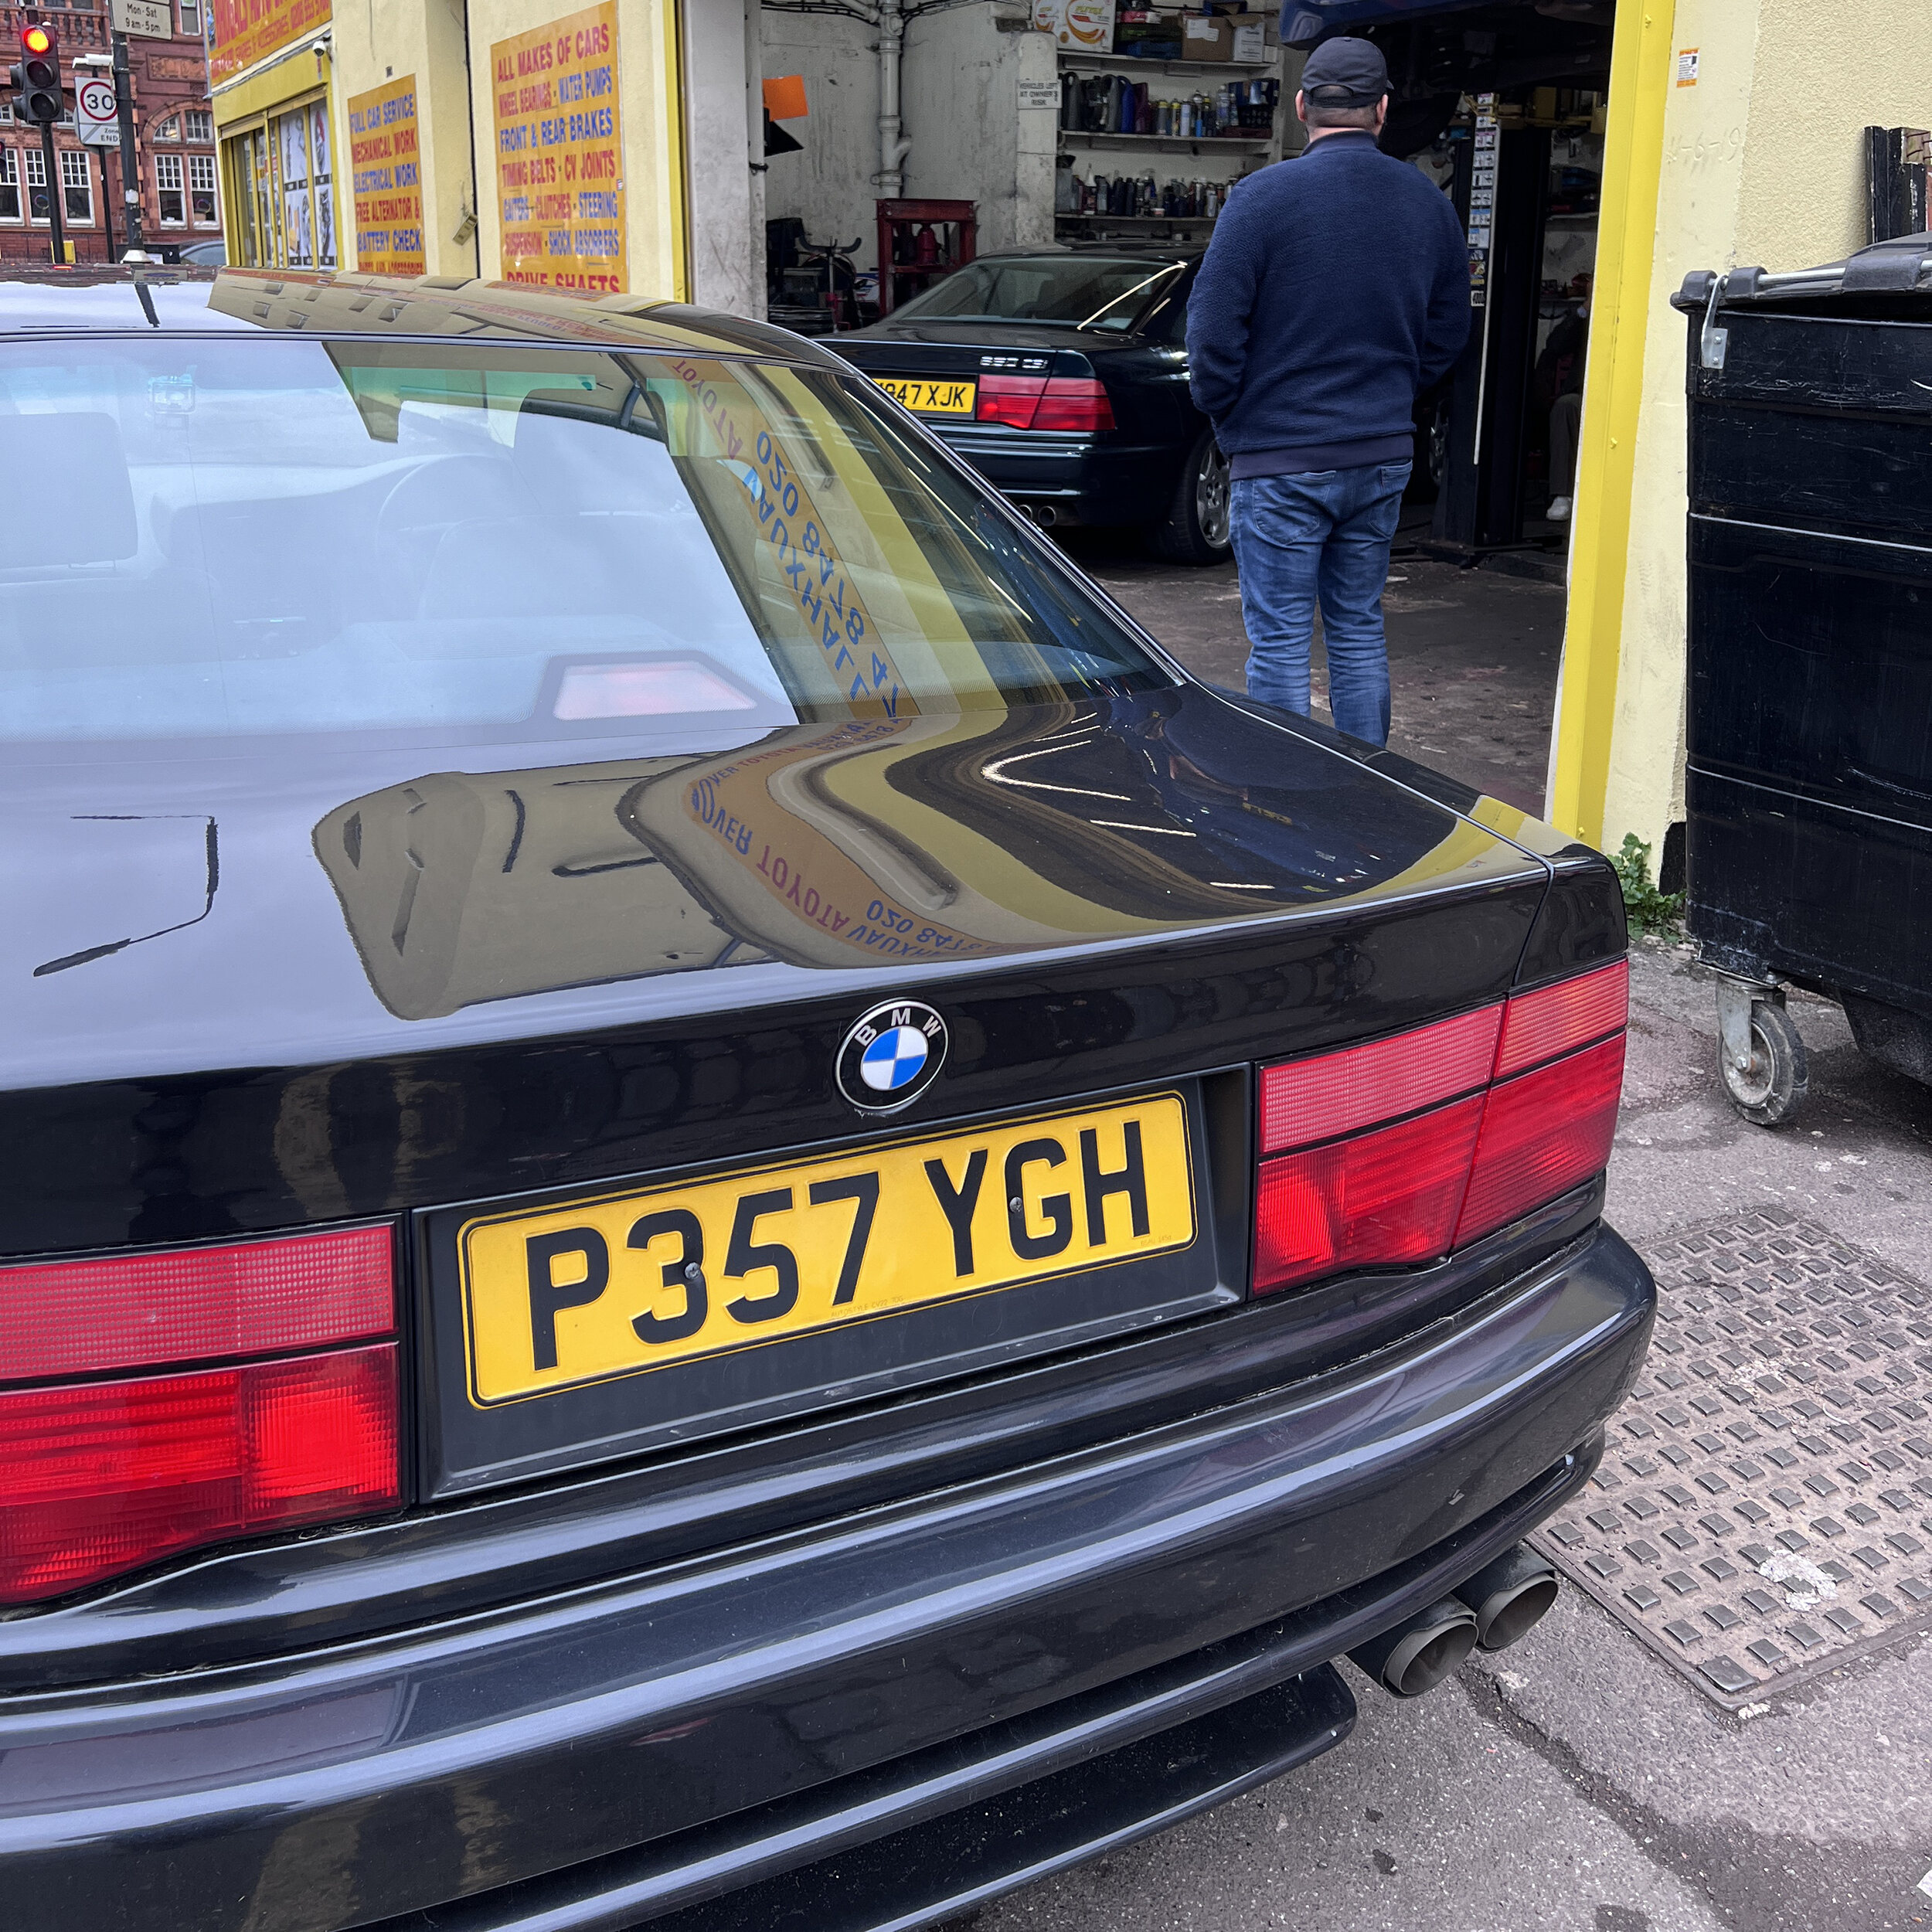 E31 840Ci - first ever BMW (and a daily!) - Page 8 - Readers' Cars - PistonHeads UK - The image shows a black BMW car parked on a street. A man, possibly of Middle Eastern descent, is standing next to the car, facing away from it towards the camera. The license plate of the car reads "P367 YHG." Behind the man and the car, there's a yellow building with signs in Arabic and English. The scene suggests that this could be an urban setting, perhaps near a business establishment or a parking lot.